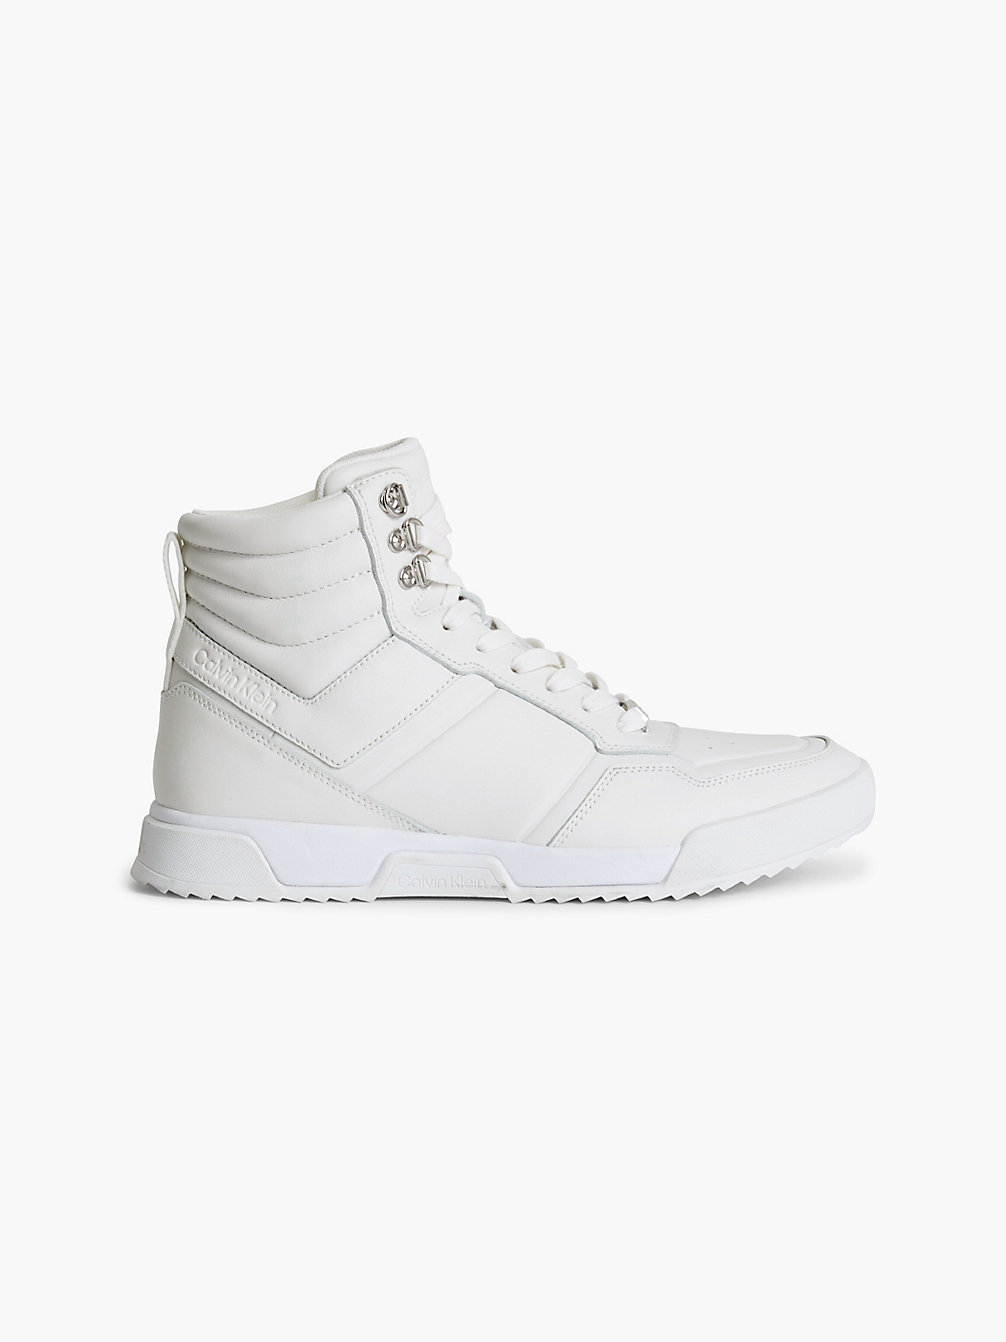 CK WHITE Leather High-Top Trainers undefined women Calvin Klein